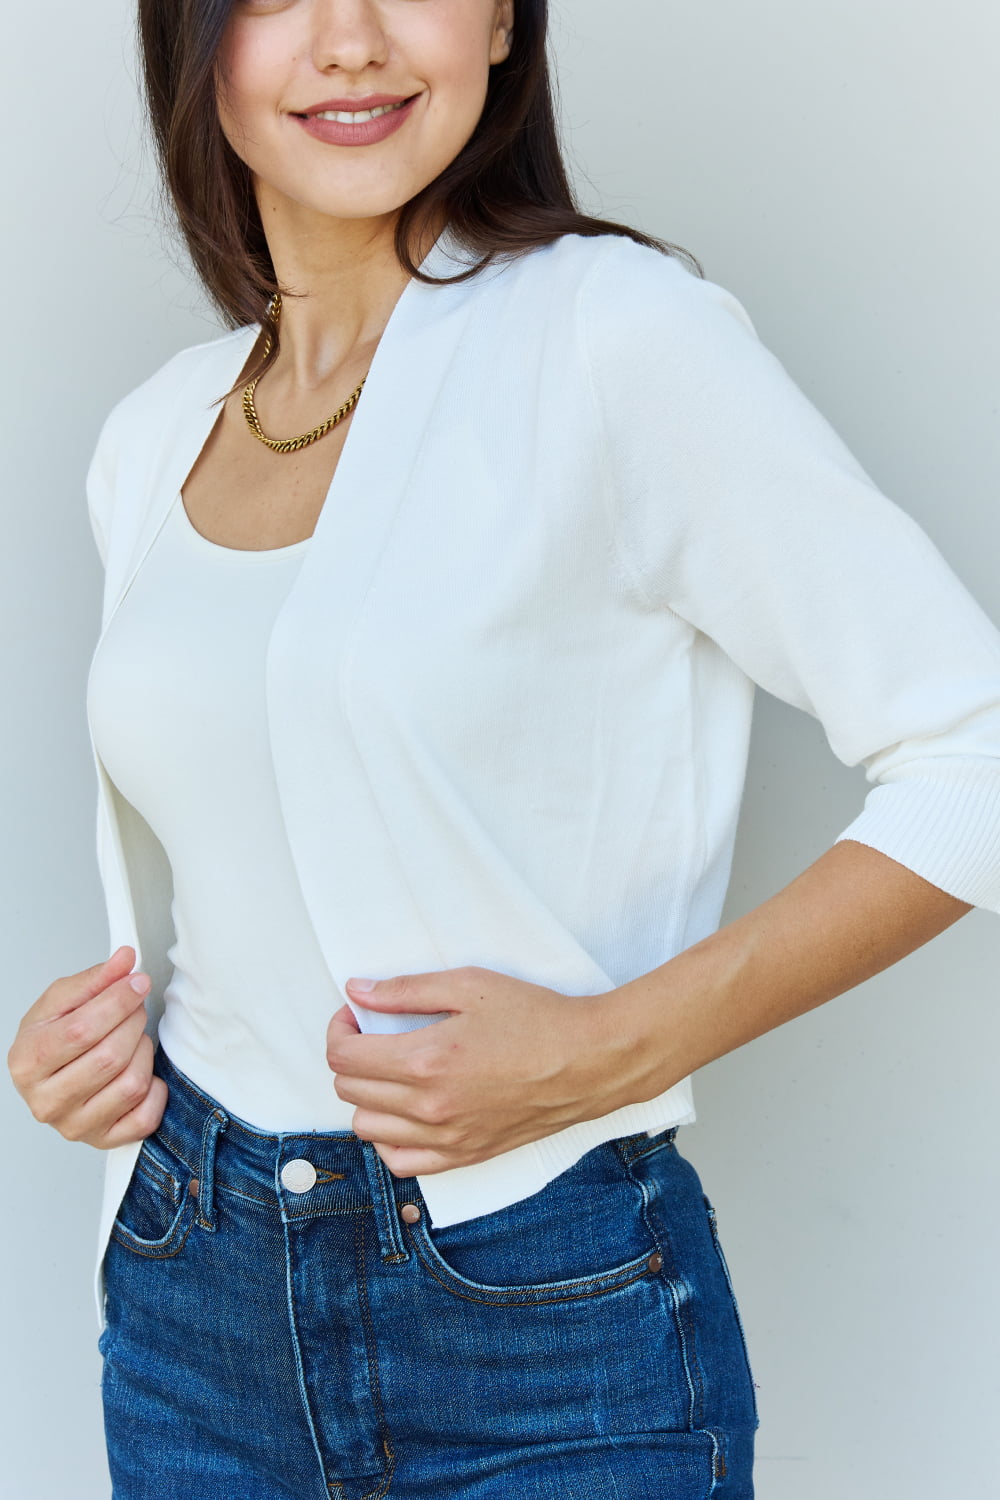 3/4 Sleeve Cropped Cardigan in Ivory - Women’s Clothing & Accessories - Shirts & Tops - 8 - 2024